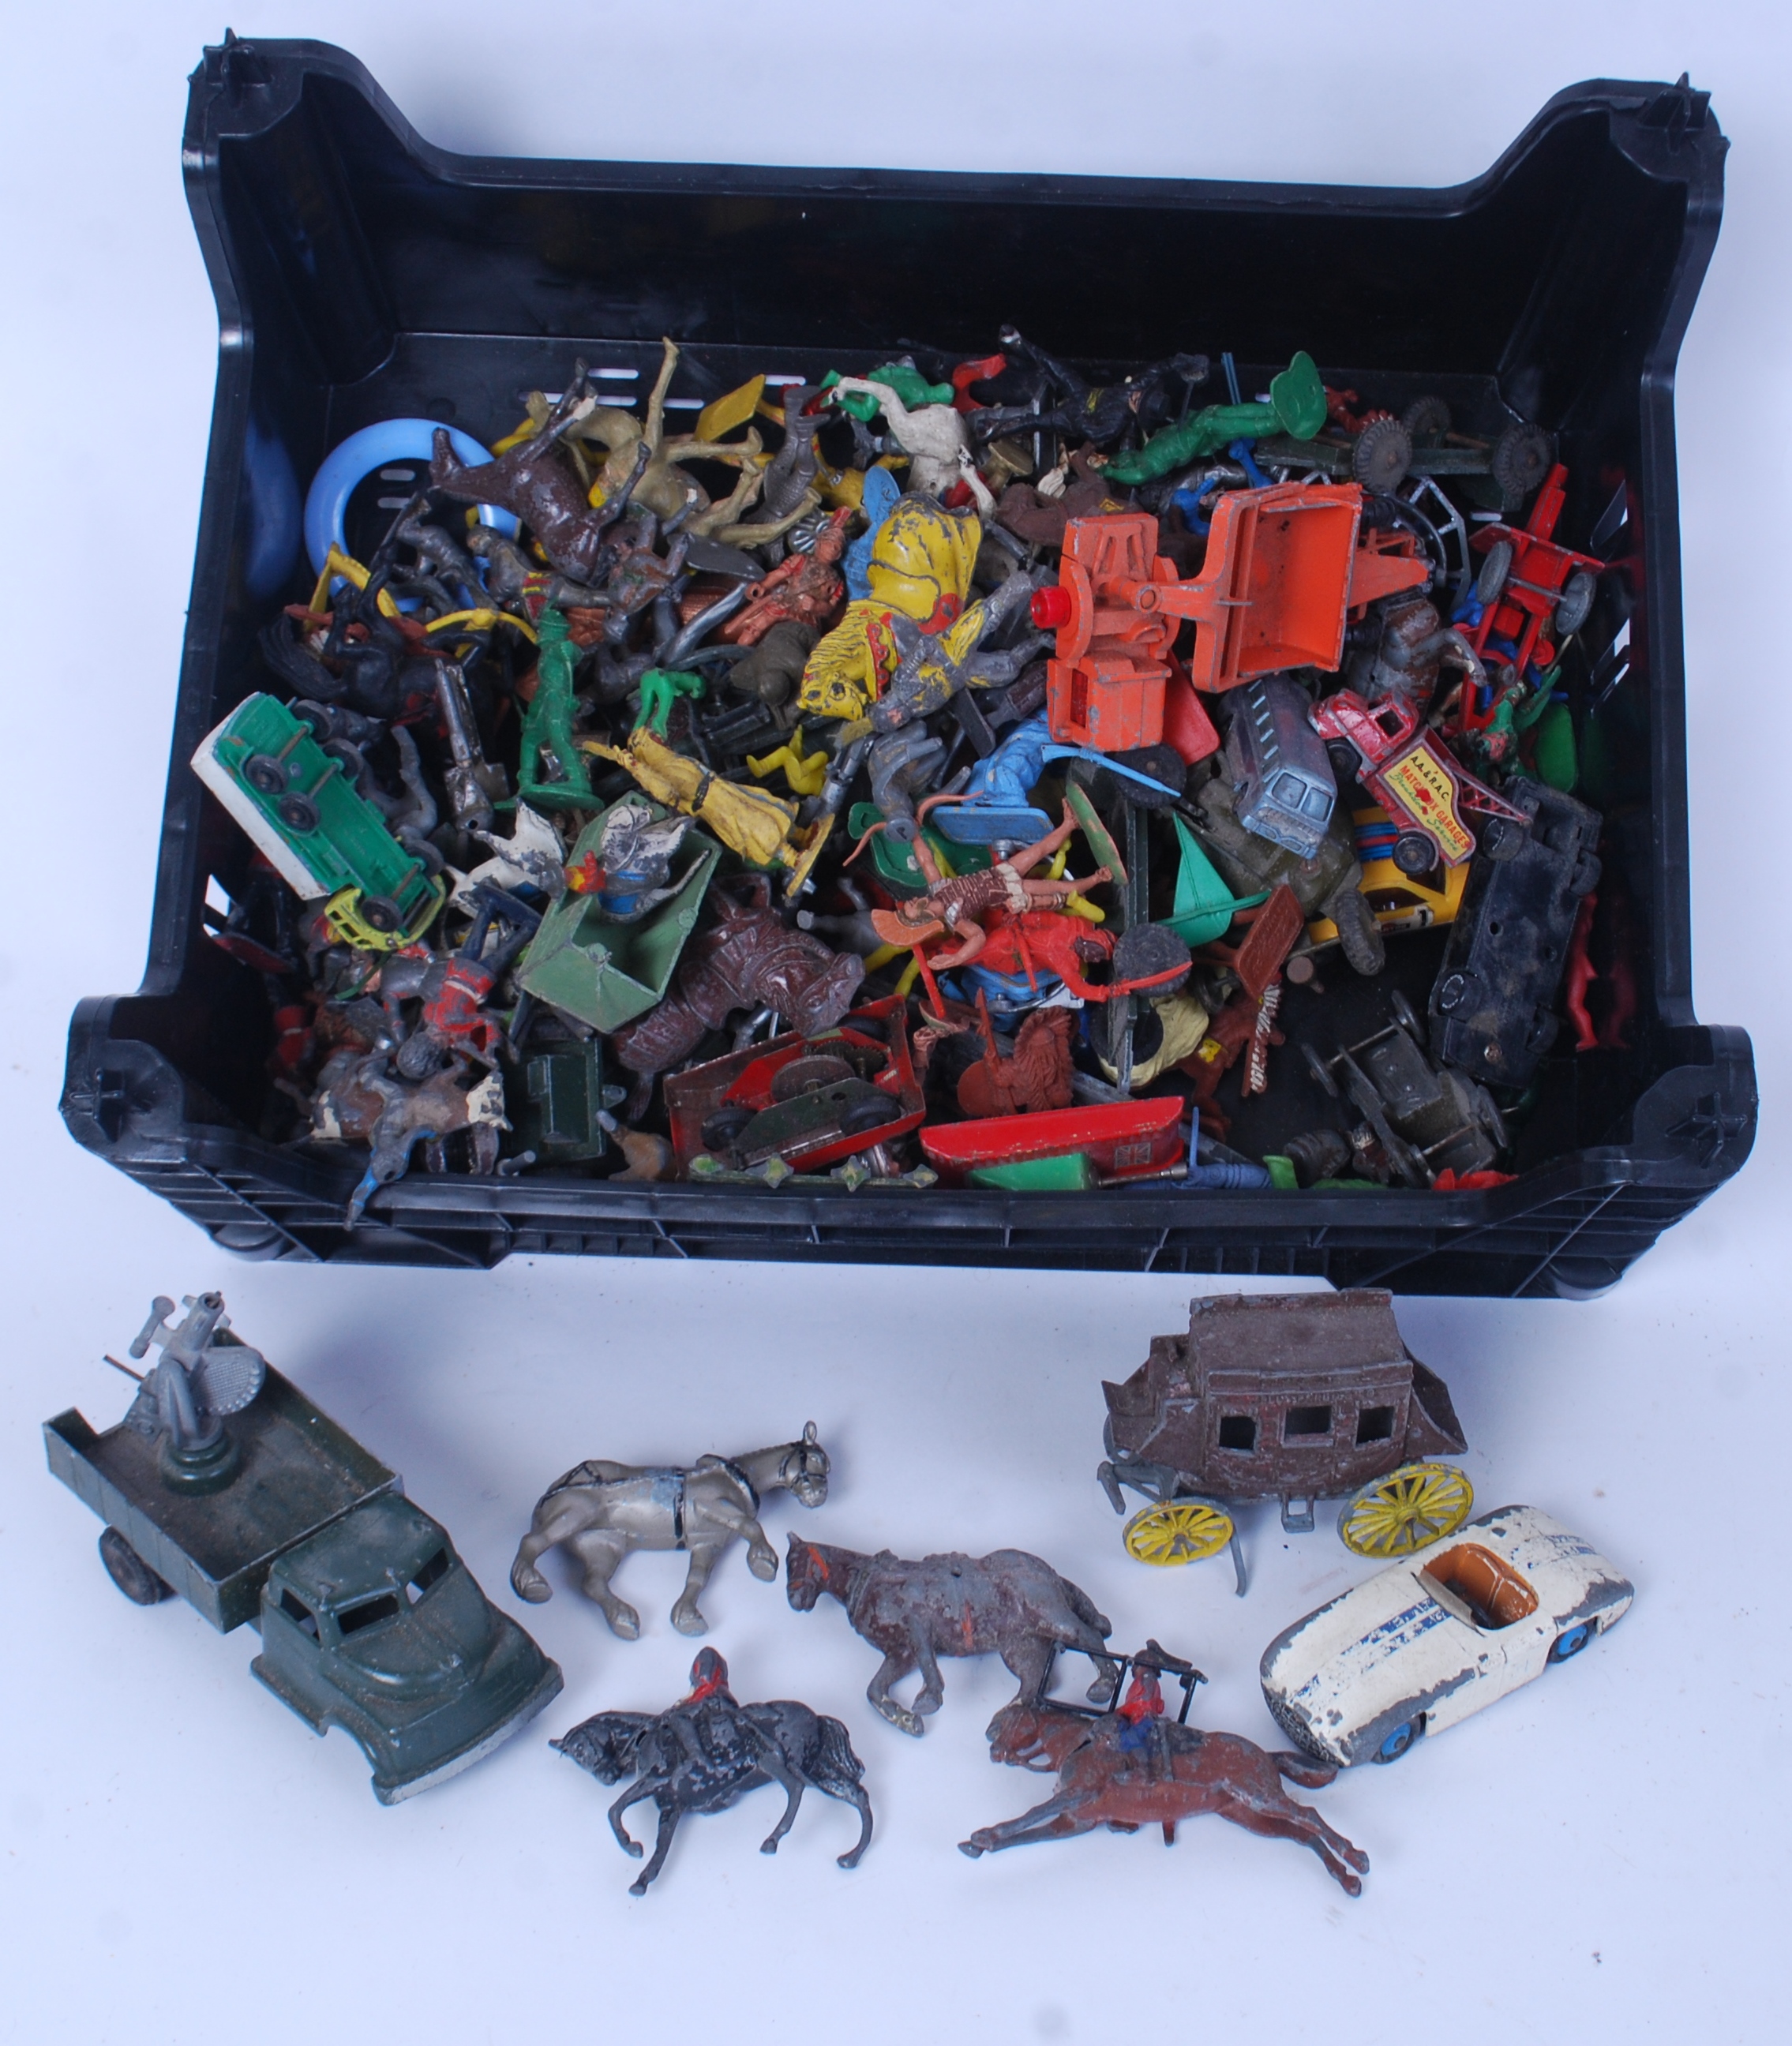 TOYS: A collection of assorted toys and